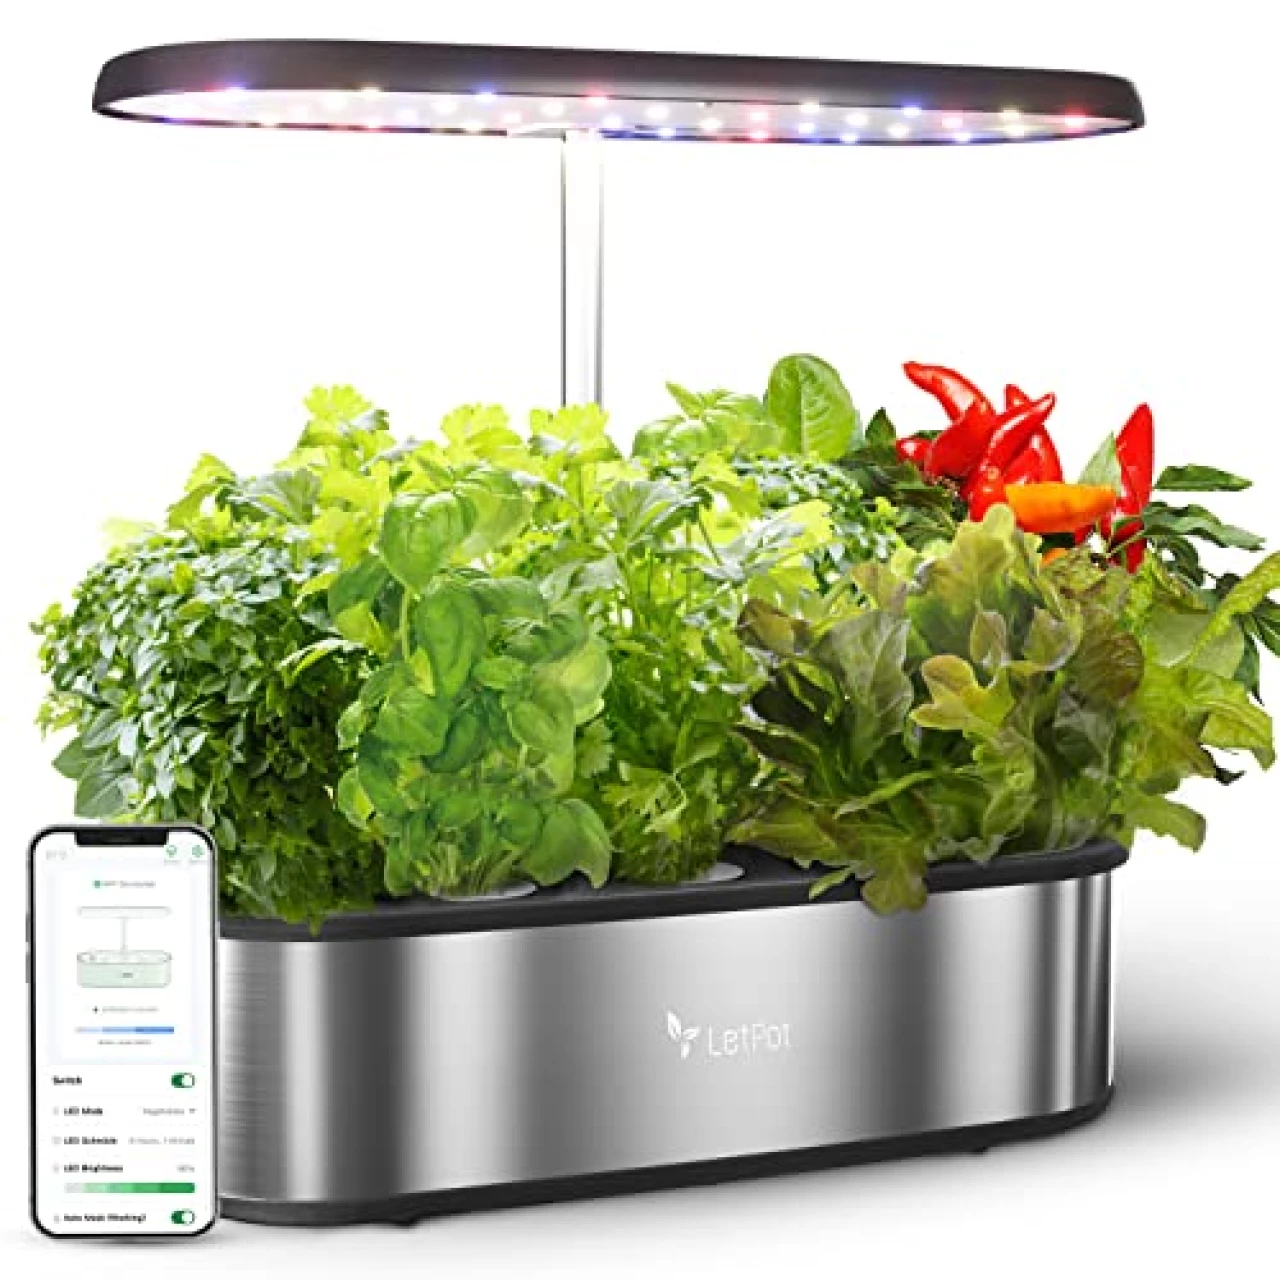 LetPot LPH-SE Hydroponics Growing System, 12 Pods Smart Herb Garden Kit Indoor, Indoor Garden, APP &amp; WiFi Controlled, with 24W Growing LED, 5.5L Water Tank, Pump System, Automatic Timer